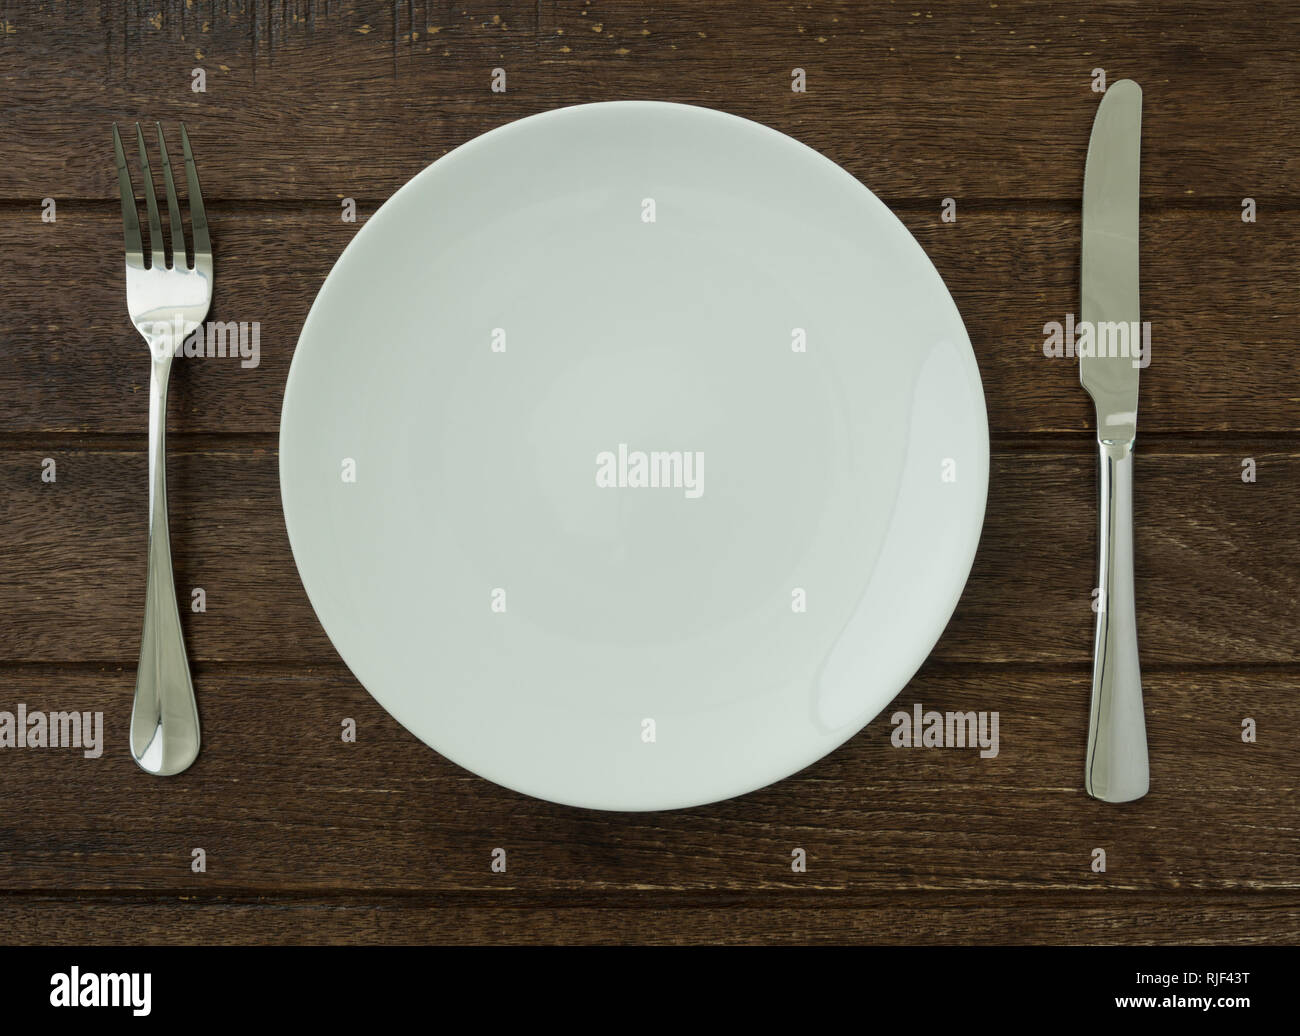 plate set on dining table Stock Photo